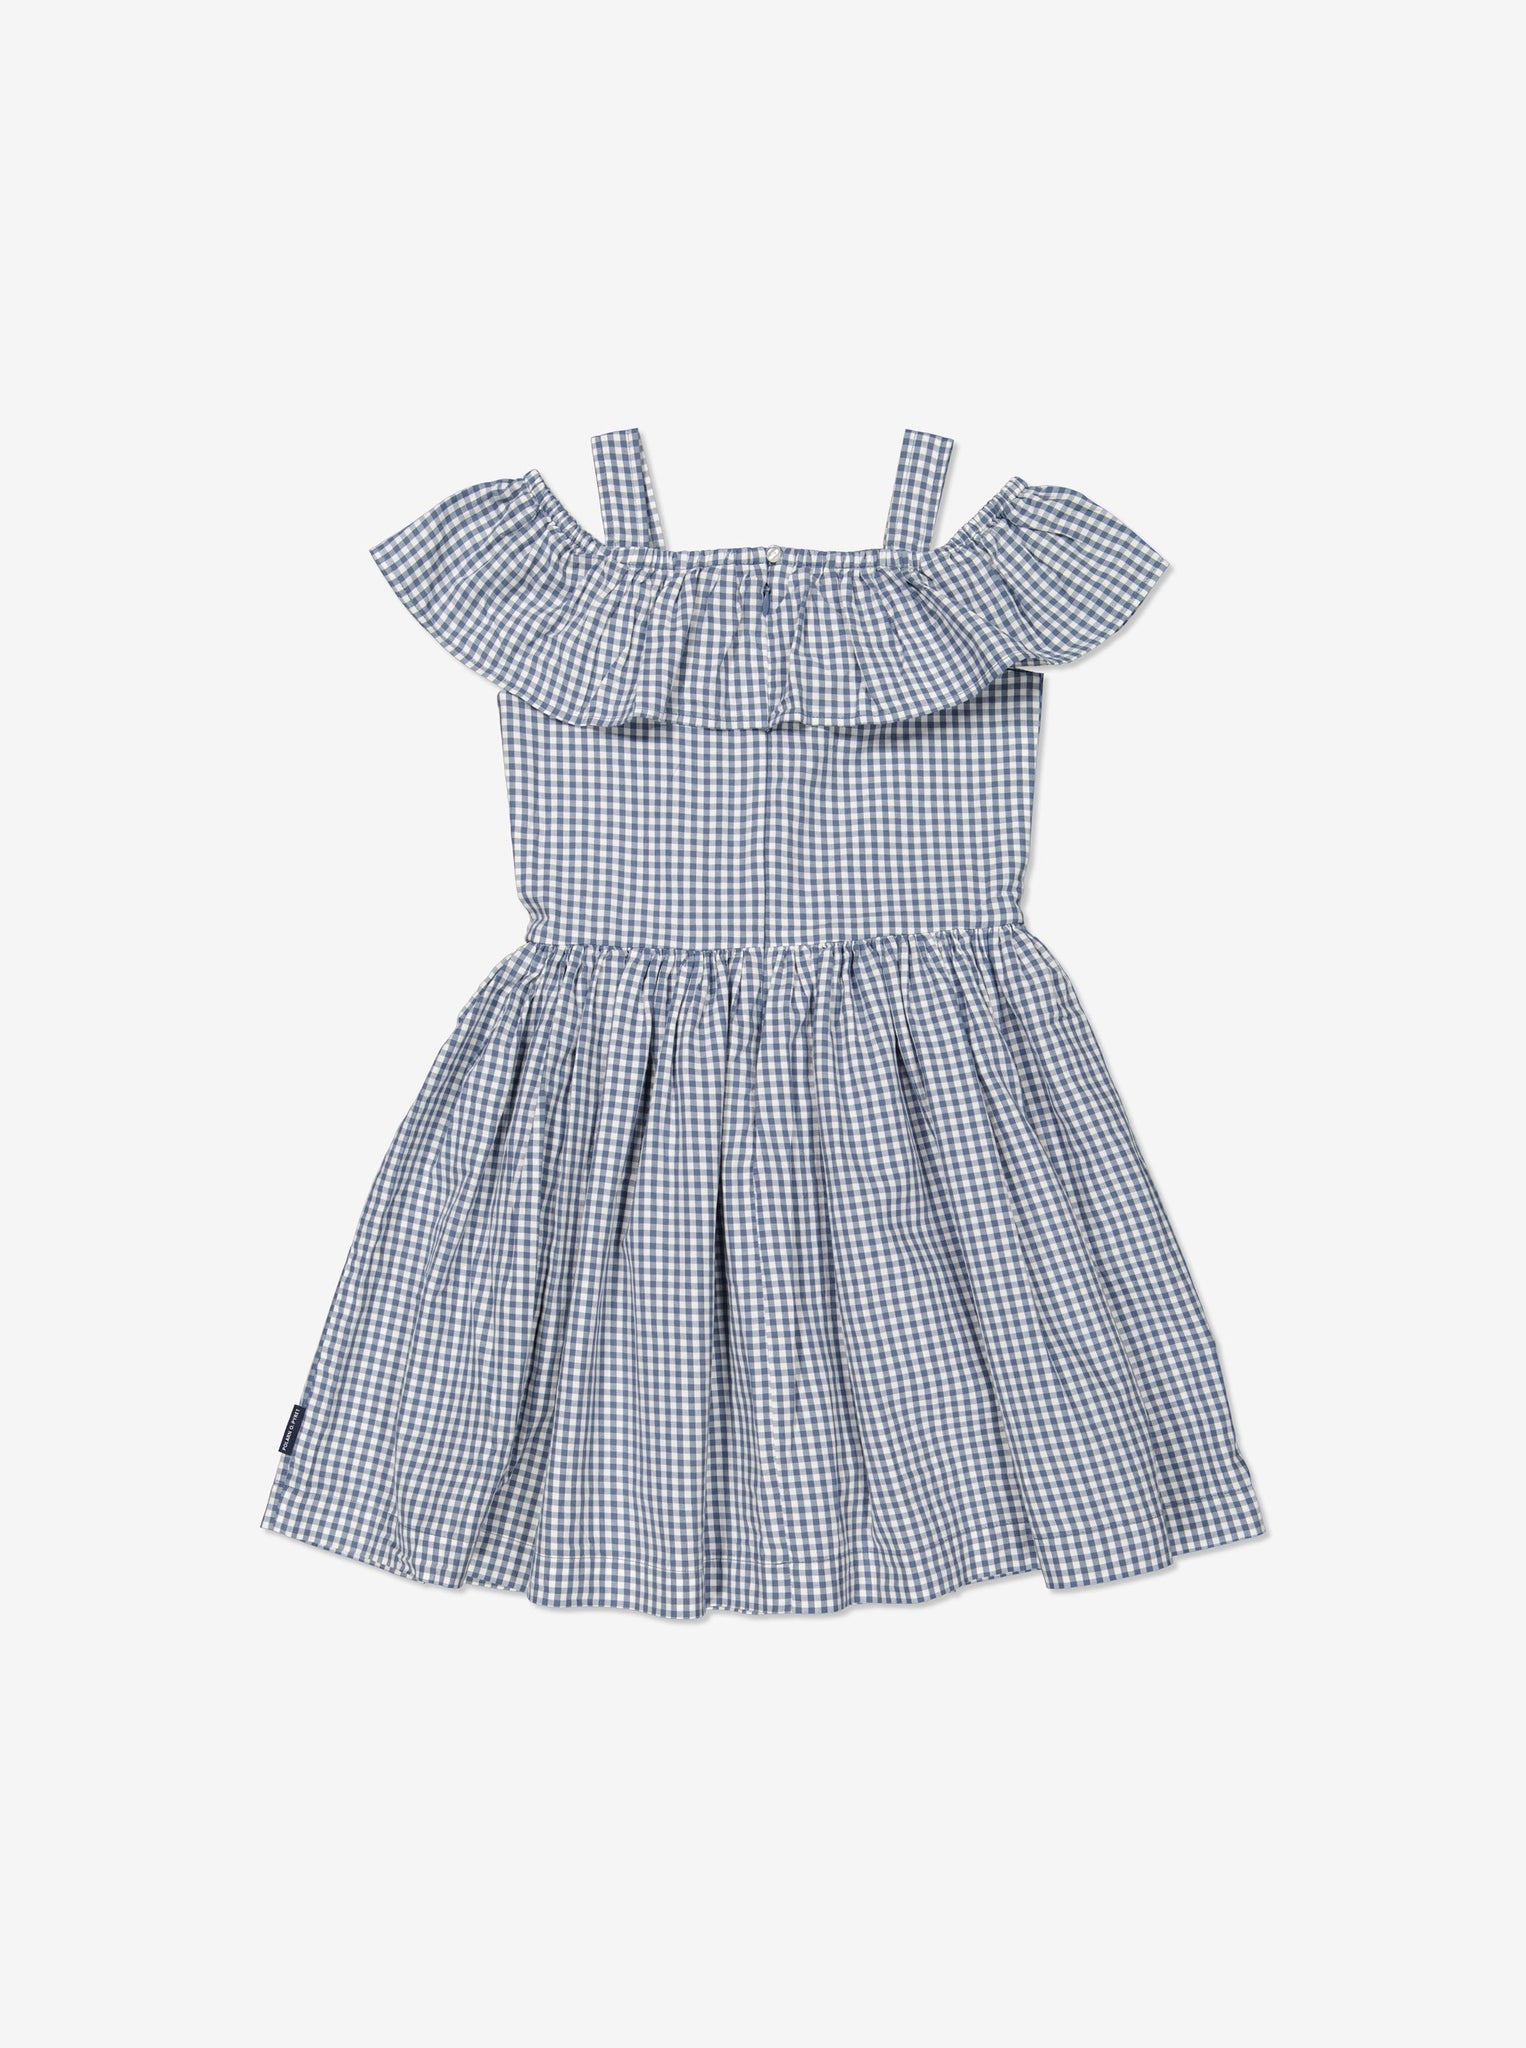 Organic Cotton Blue Checked Girls Dress from Polarn O. Pyret Kidswear. Made from 100% GOTS Organic Cotton.